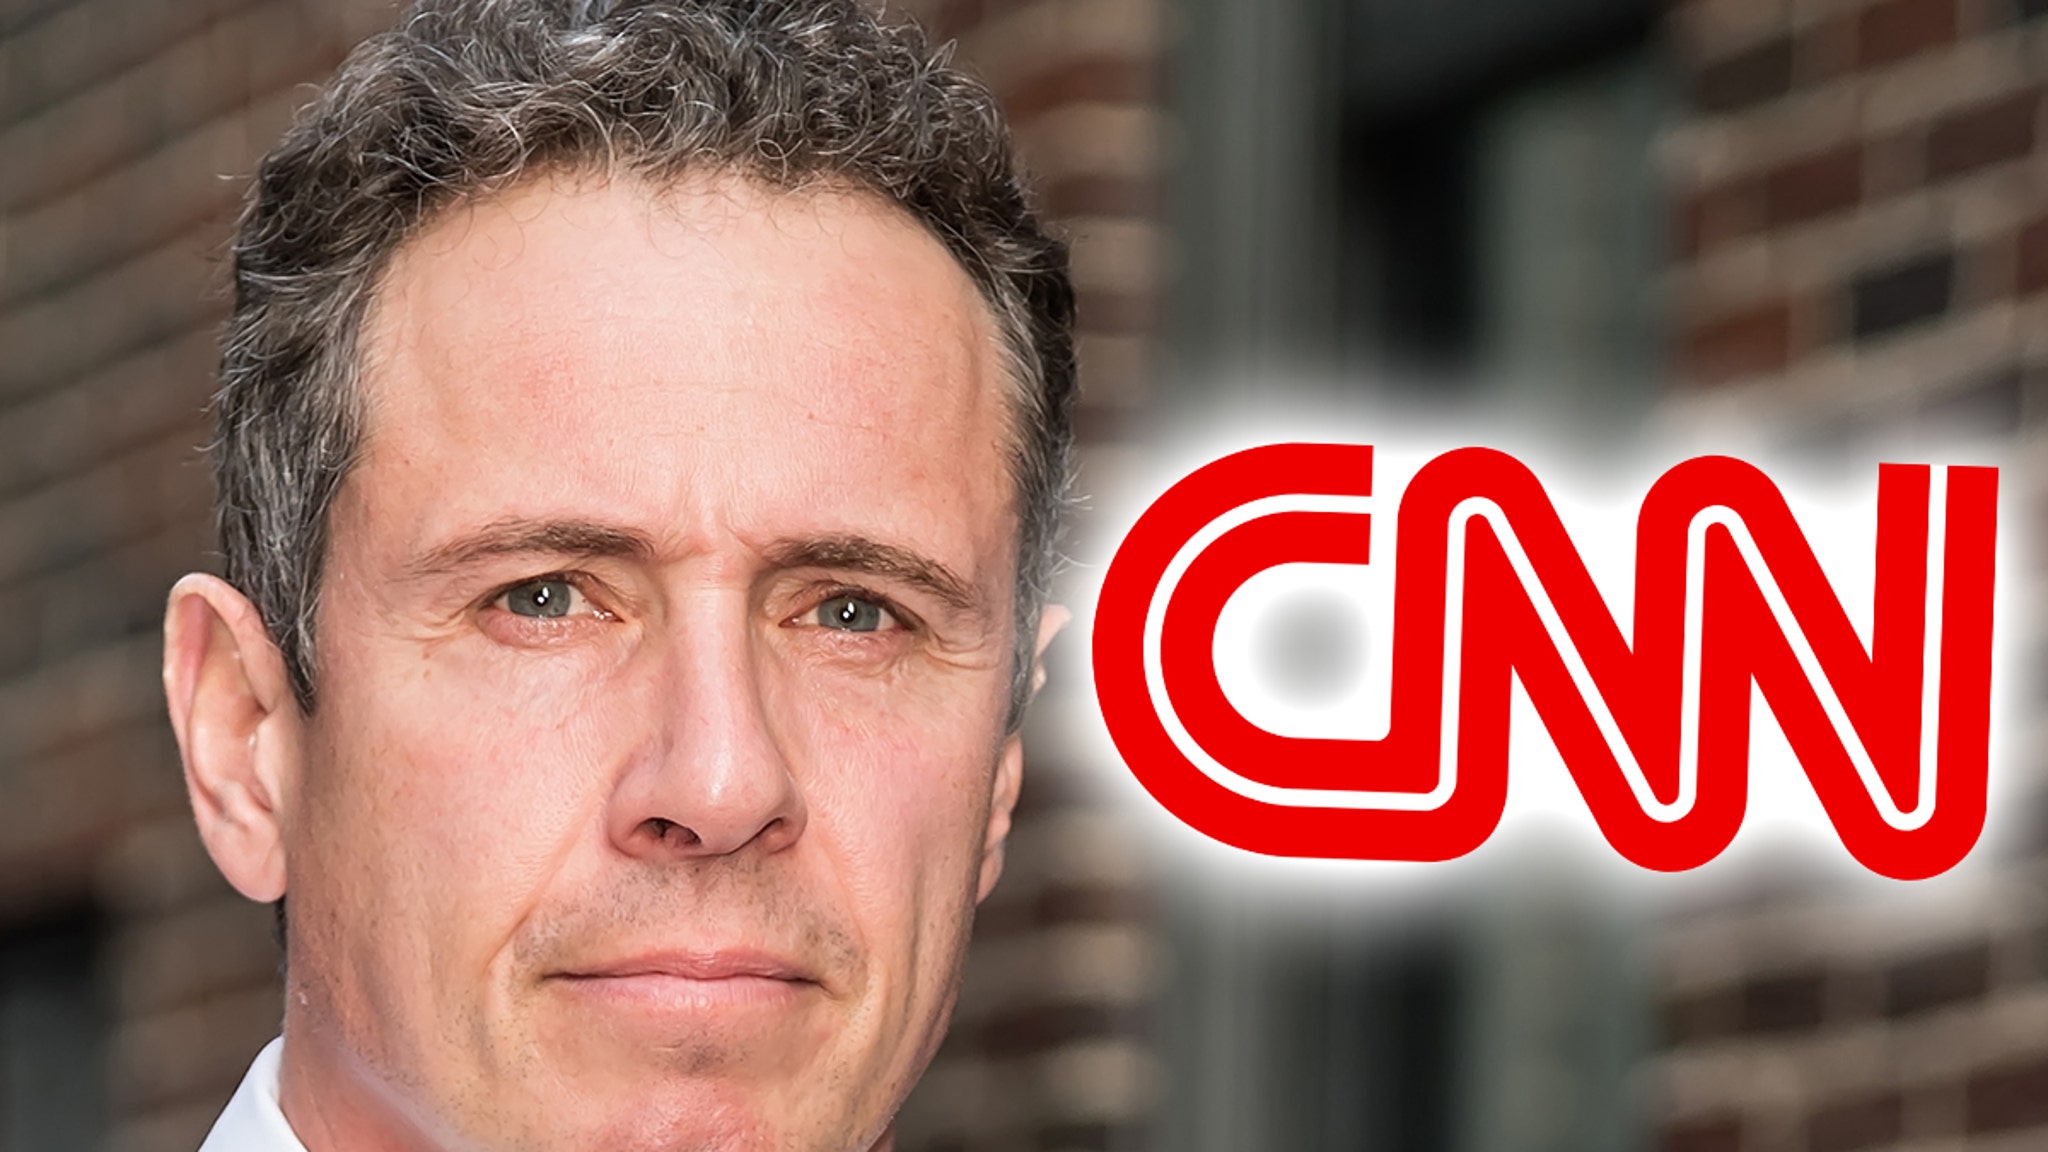 CNN Suspends Chris Cuomo Indefinitely For Helping Brother, Andrew